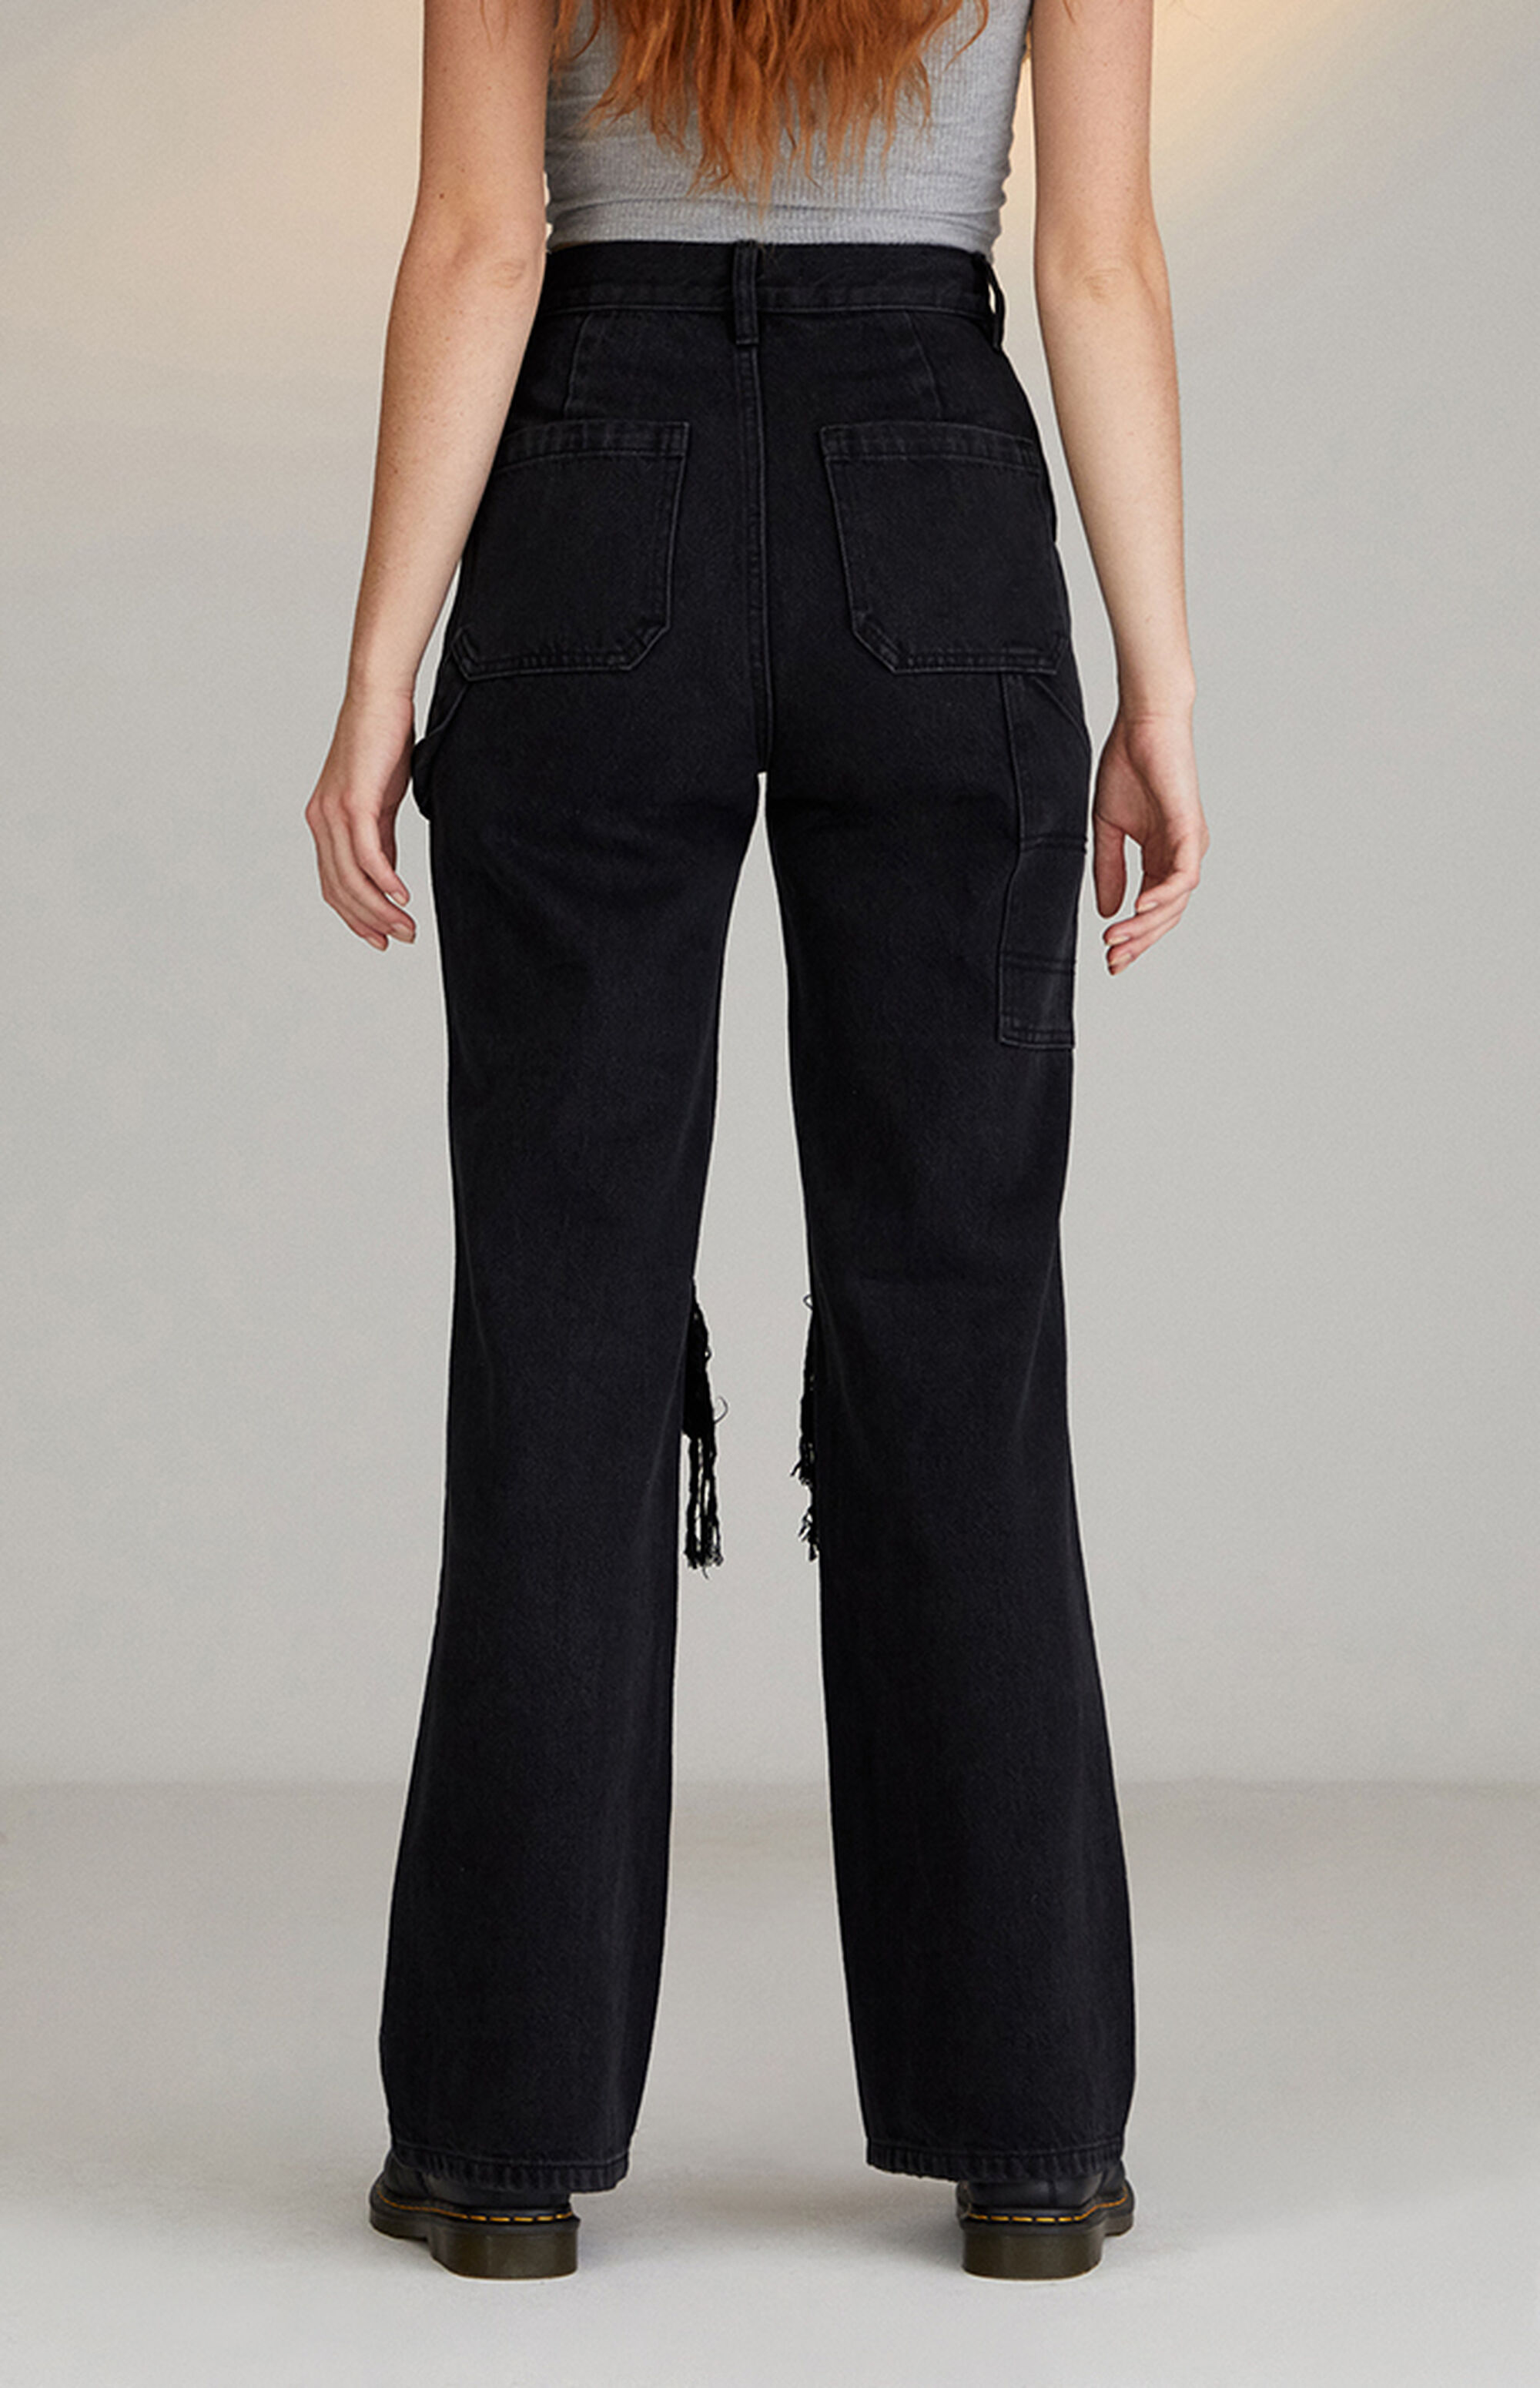 PacSun Black Distressed Ultra High Waisted Flare Carpenter Pants | PacSun